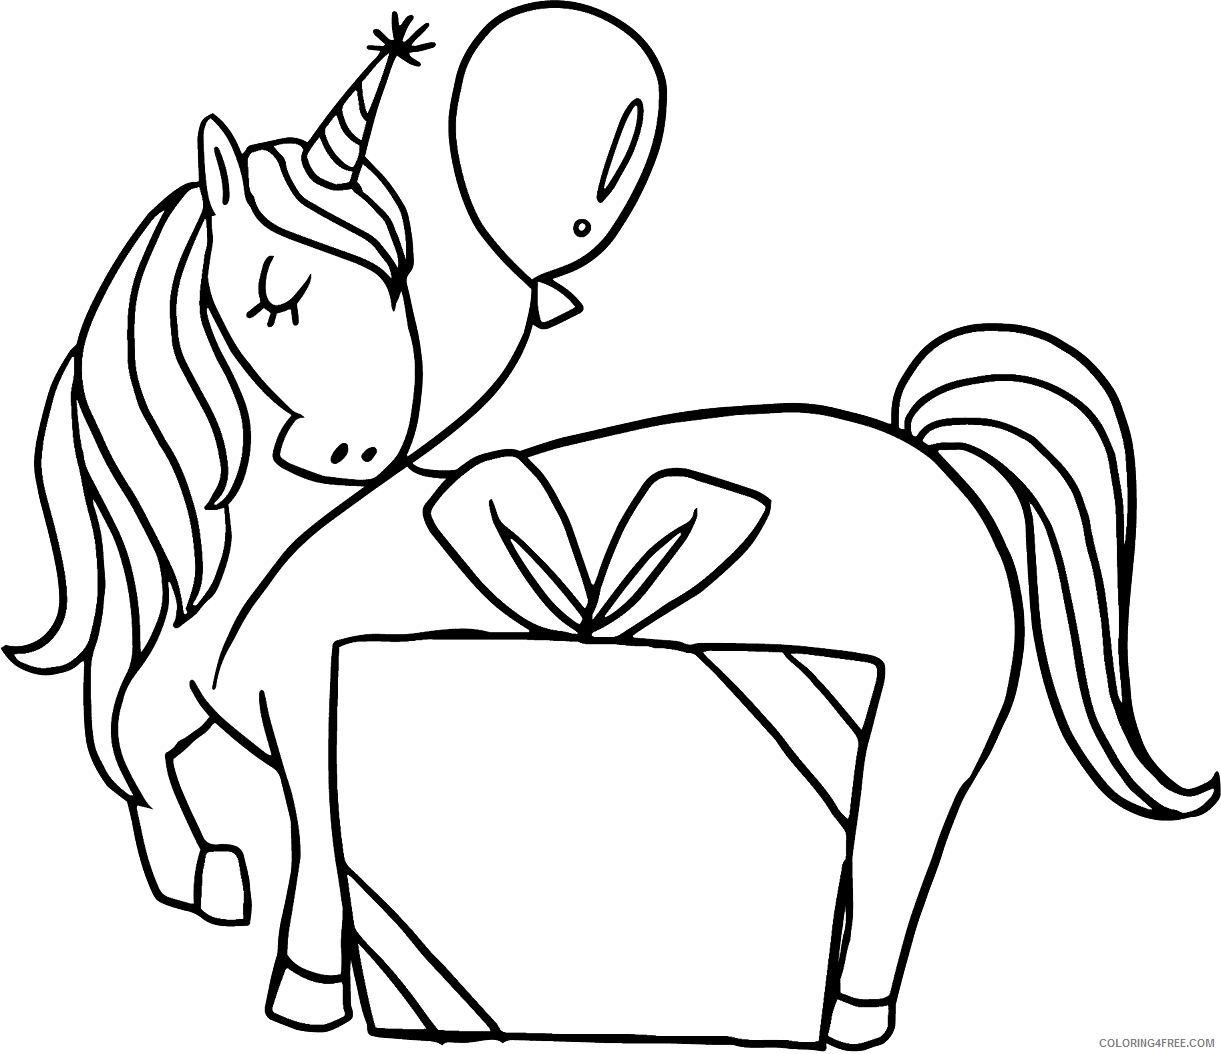 Unicorn Coloring Pages birthday_unicorn Printable 2021 6025 Coloring4free